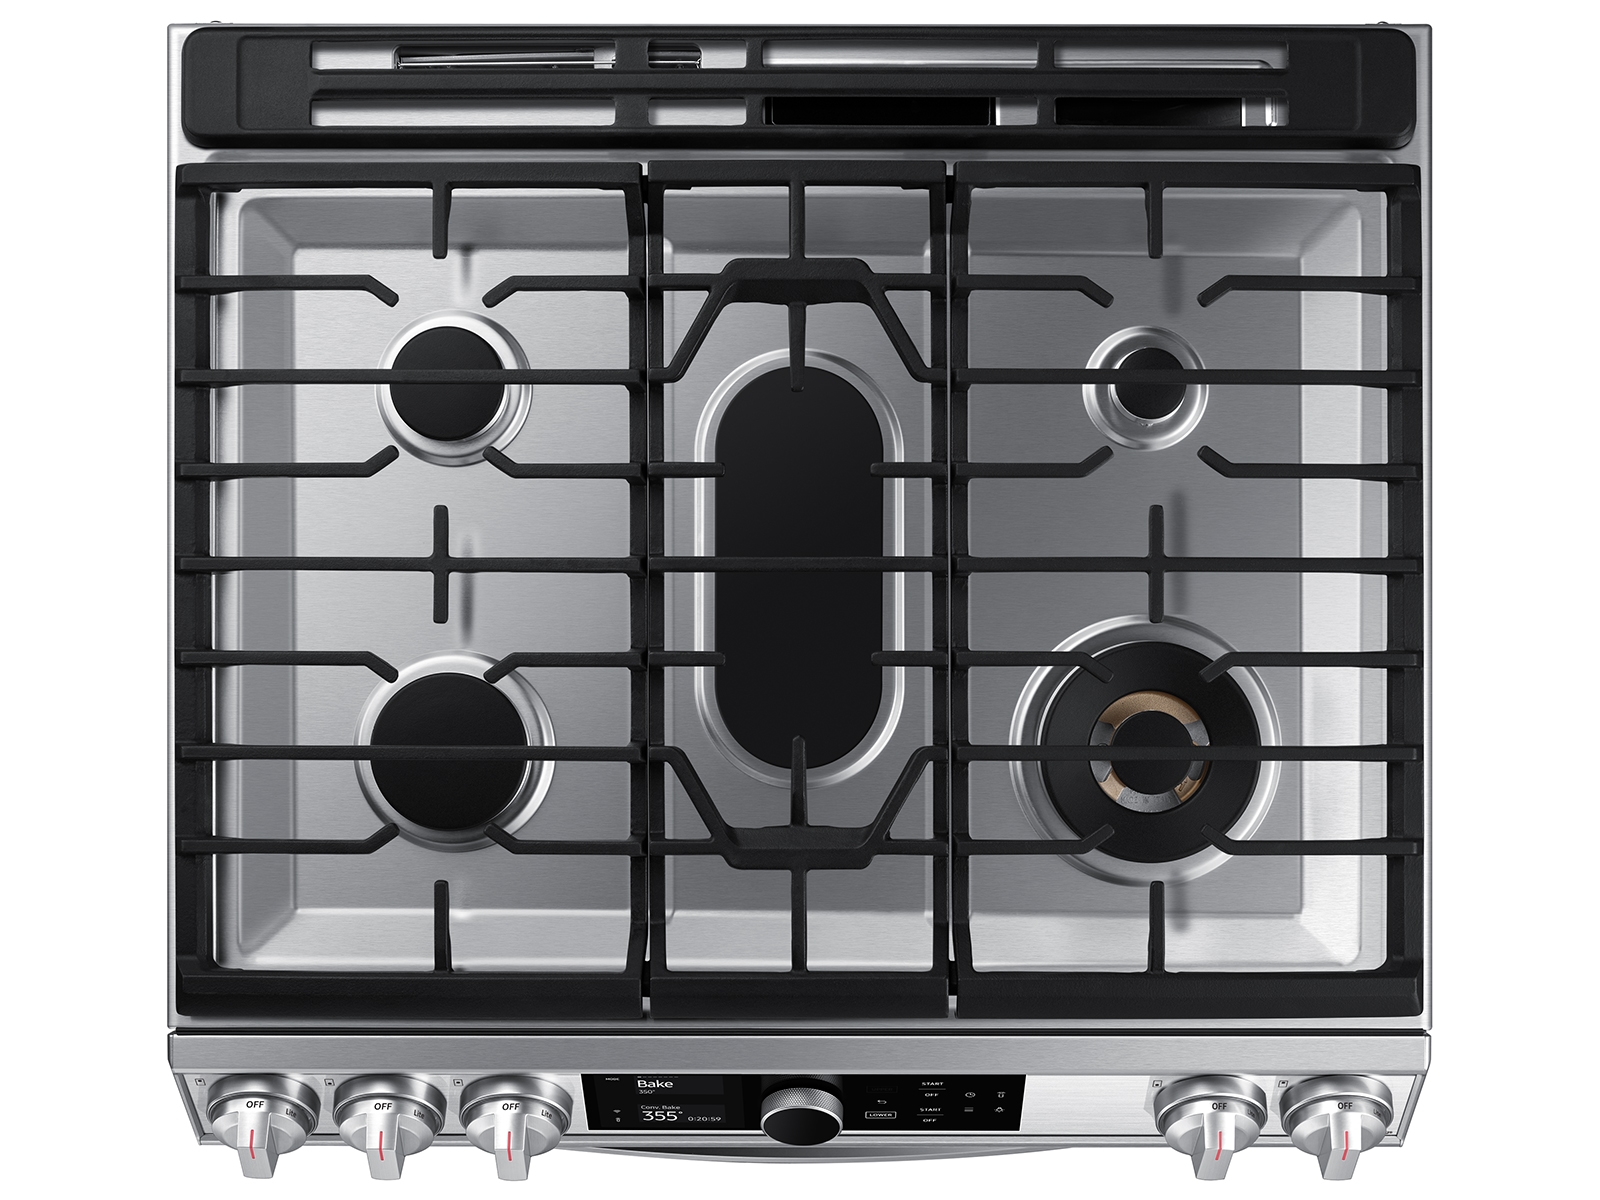 NE63T8751SS Samsung Appliances 6.3 cu ft. Smart Slide-in Electric Range  with Smart Dial, Air Fry, & Flex Duo™ in Stainless Steel FINGERPRINT  RESISTANT STAINLESS STEEL - Jetson TV & Appliance